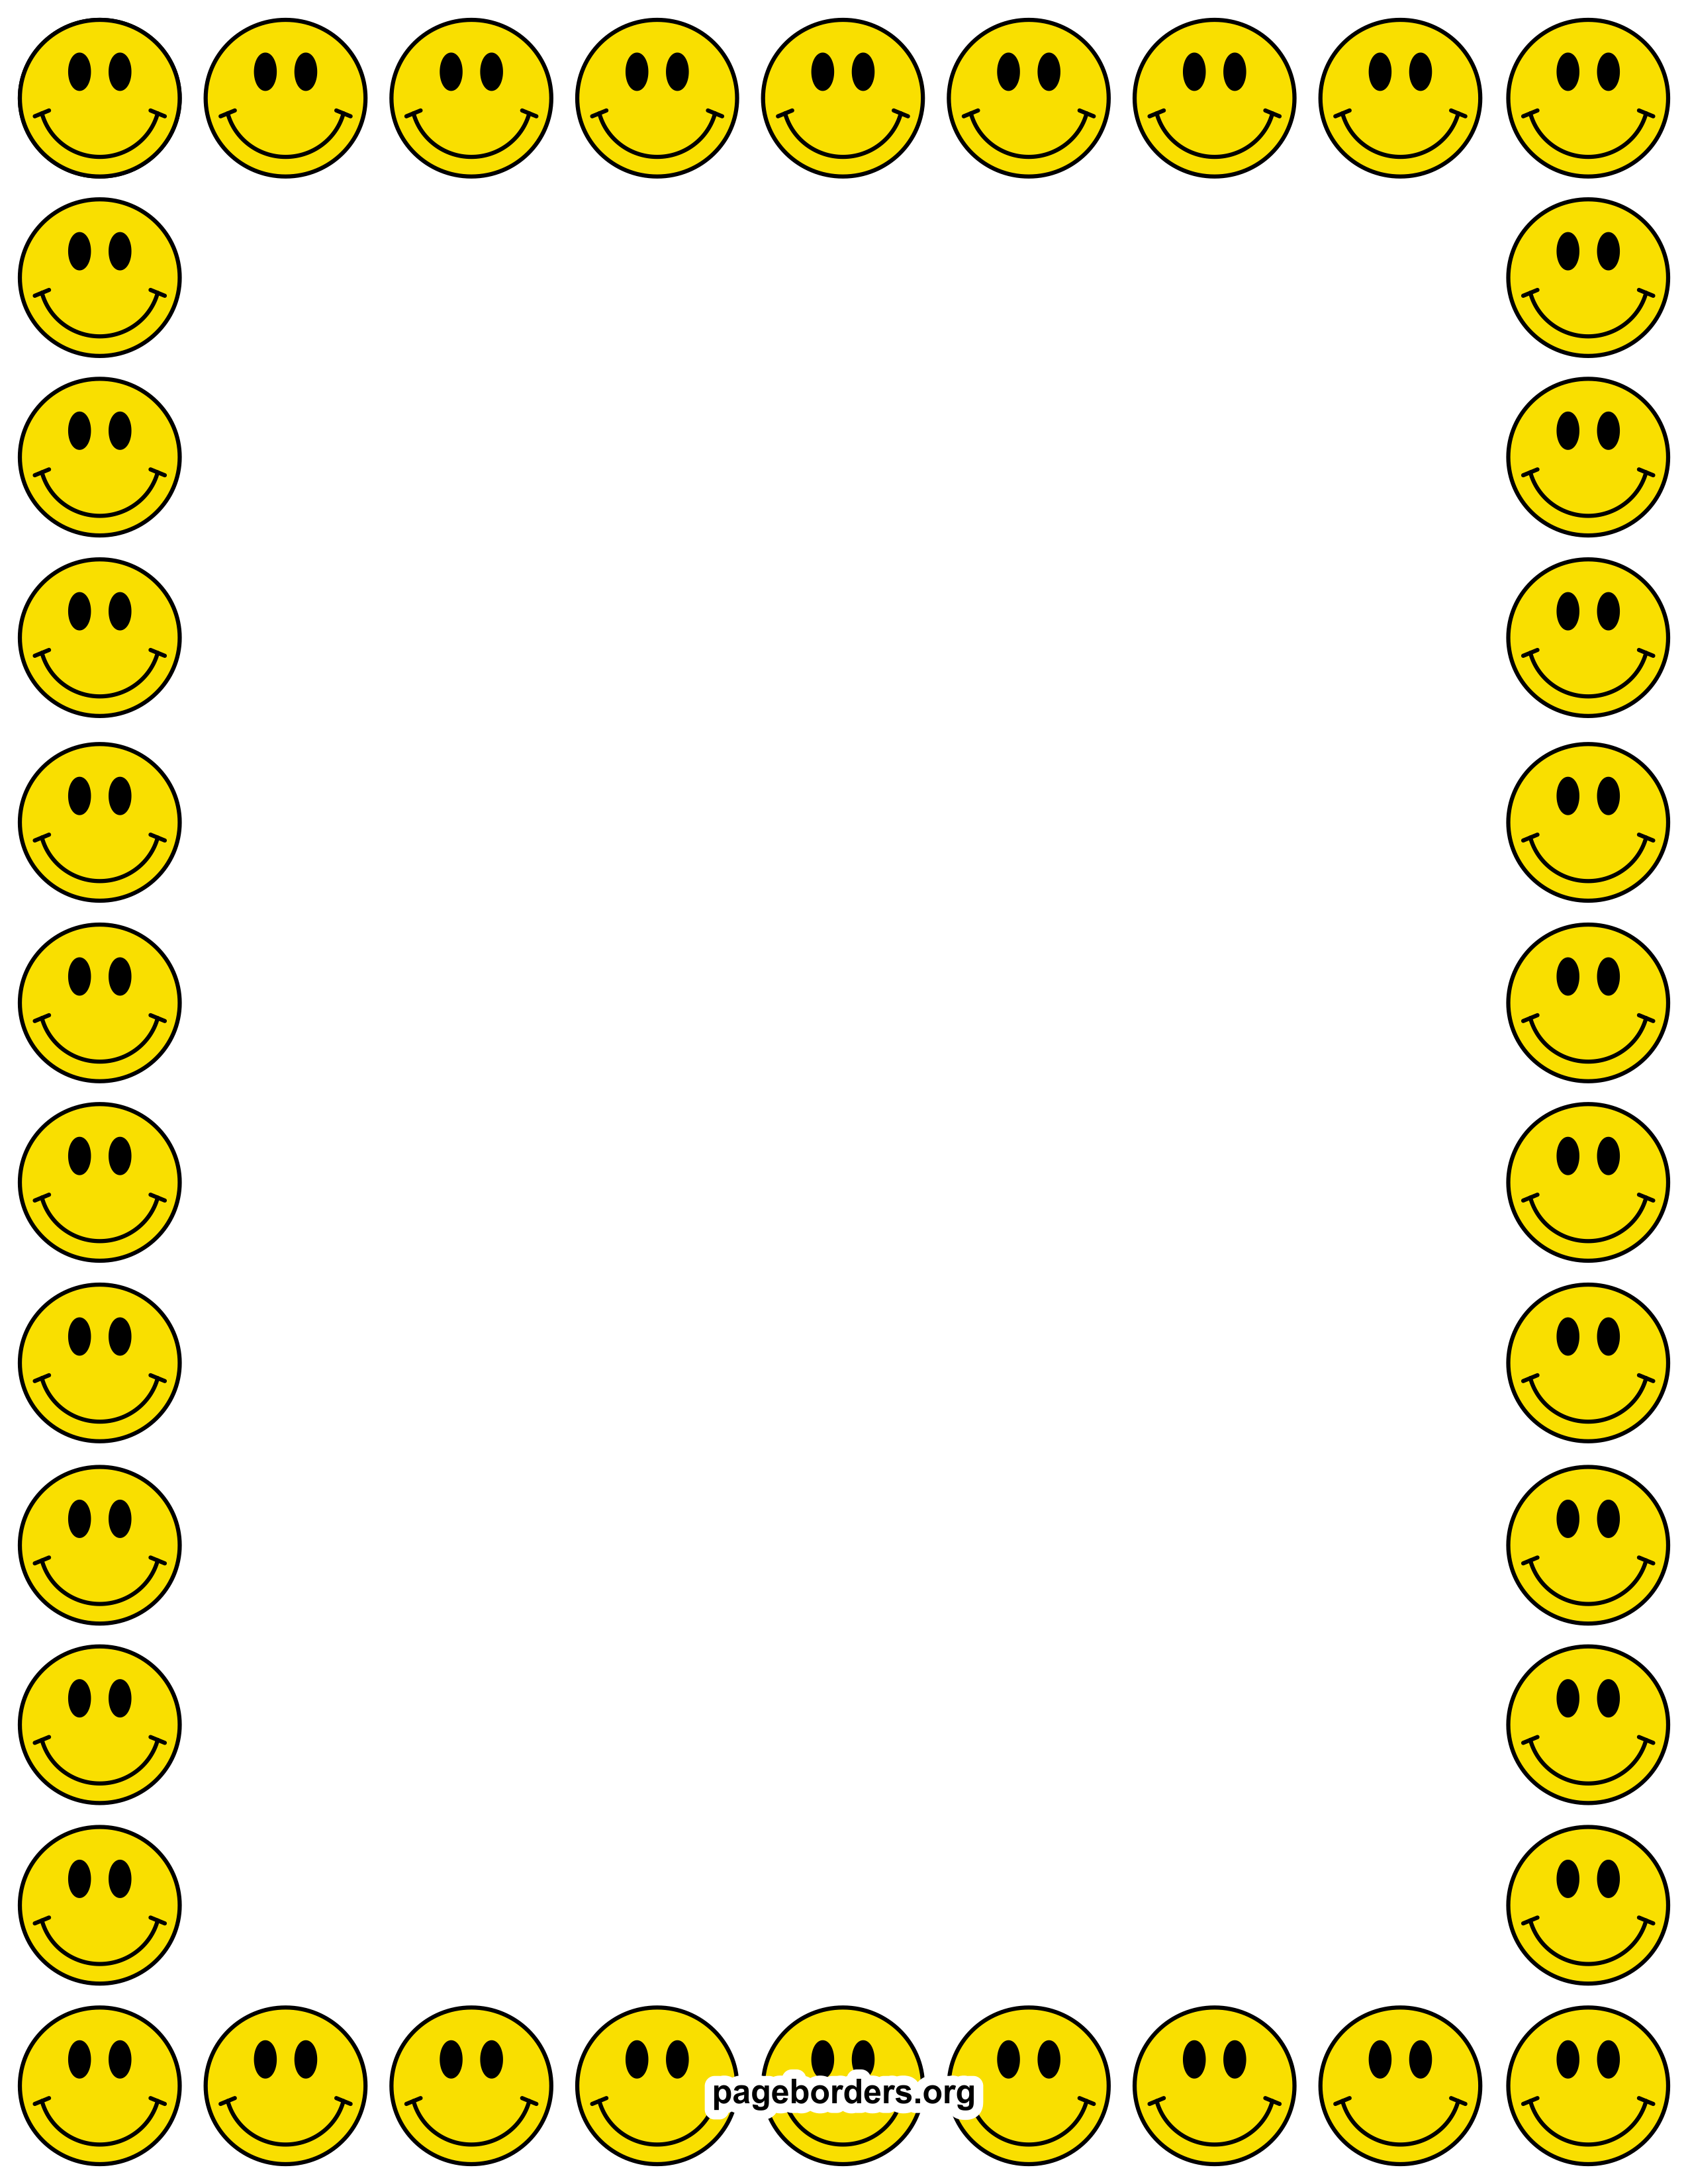 Smiley Face Border: Clip Art, Page Border, and Vector Graphics